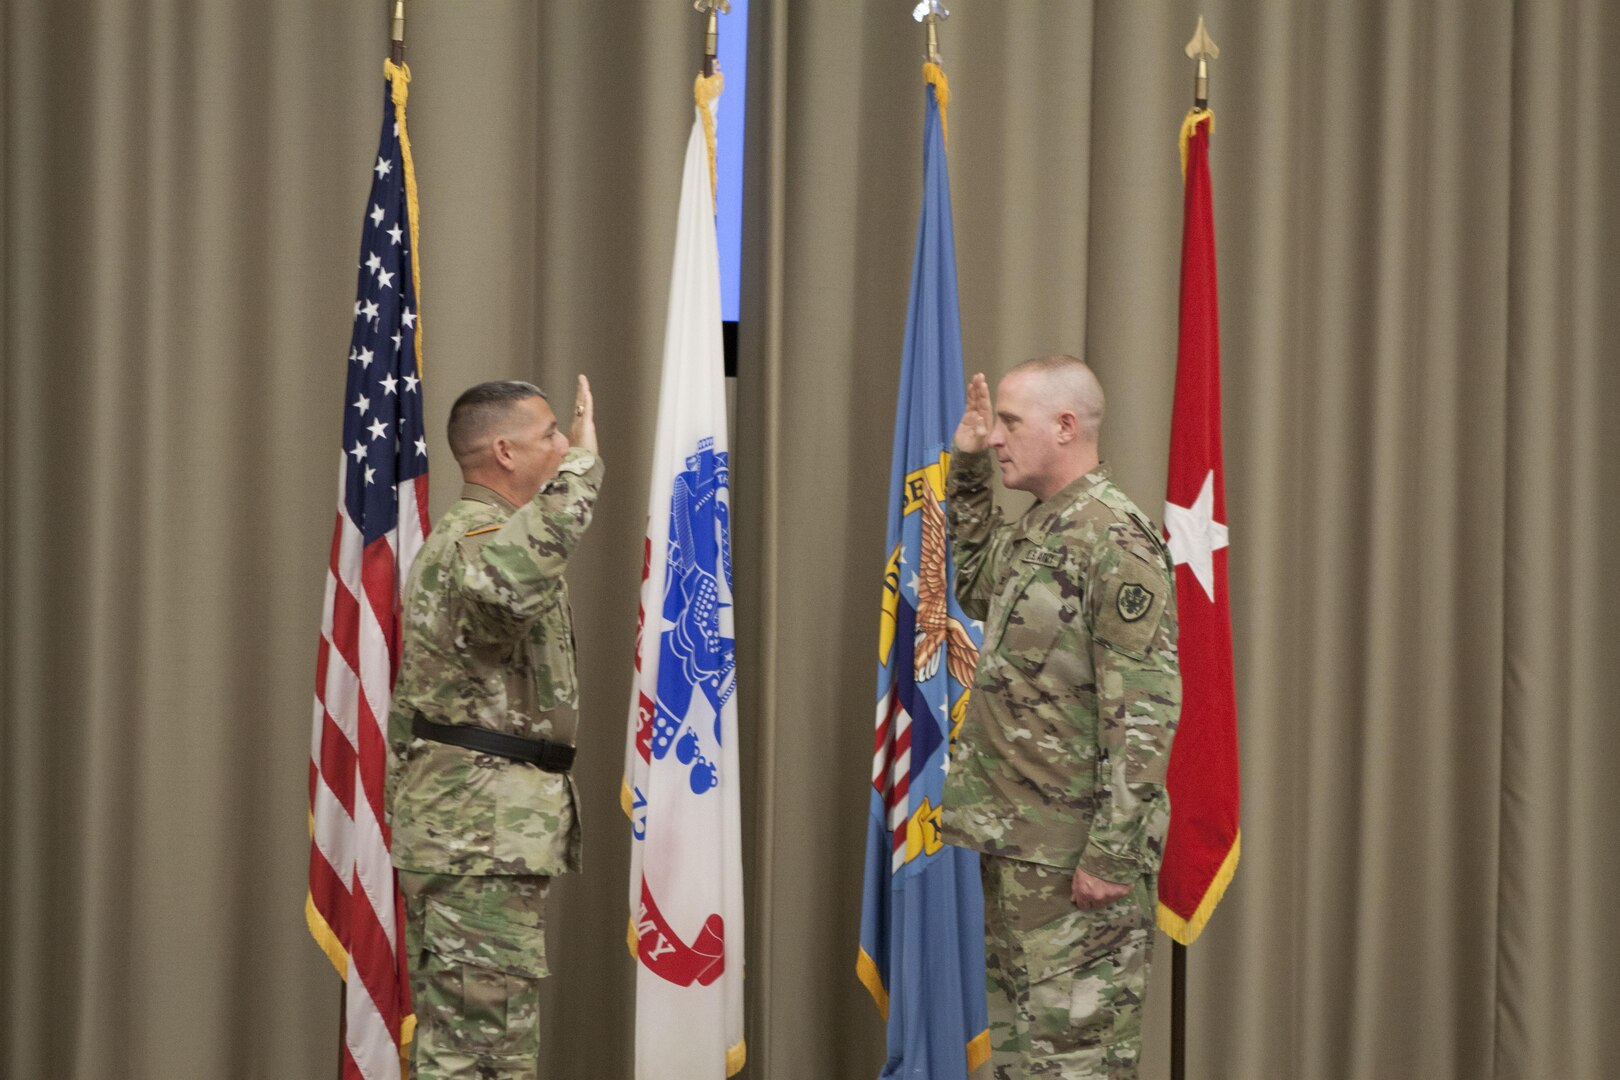 DLA Distribution’s Army Lt. Col. Roger Keen (right) was promoted to the rank of Colonel during a ceremony June 5. The ceremony was officiated by DLA Distribution commanding general Army Brig. Gen. John Laskodi (left). 